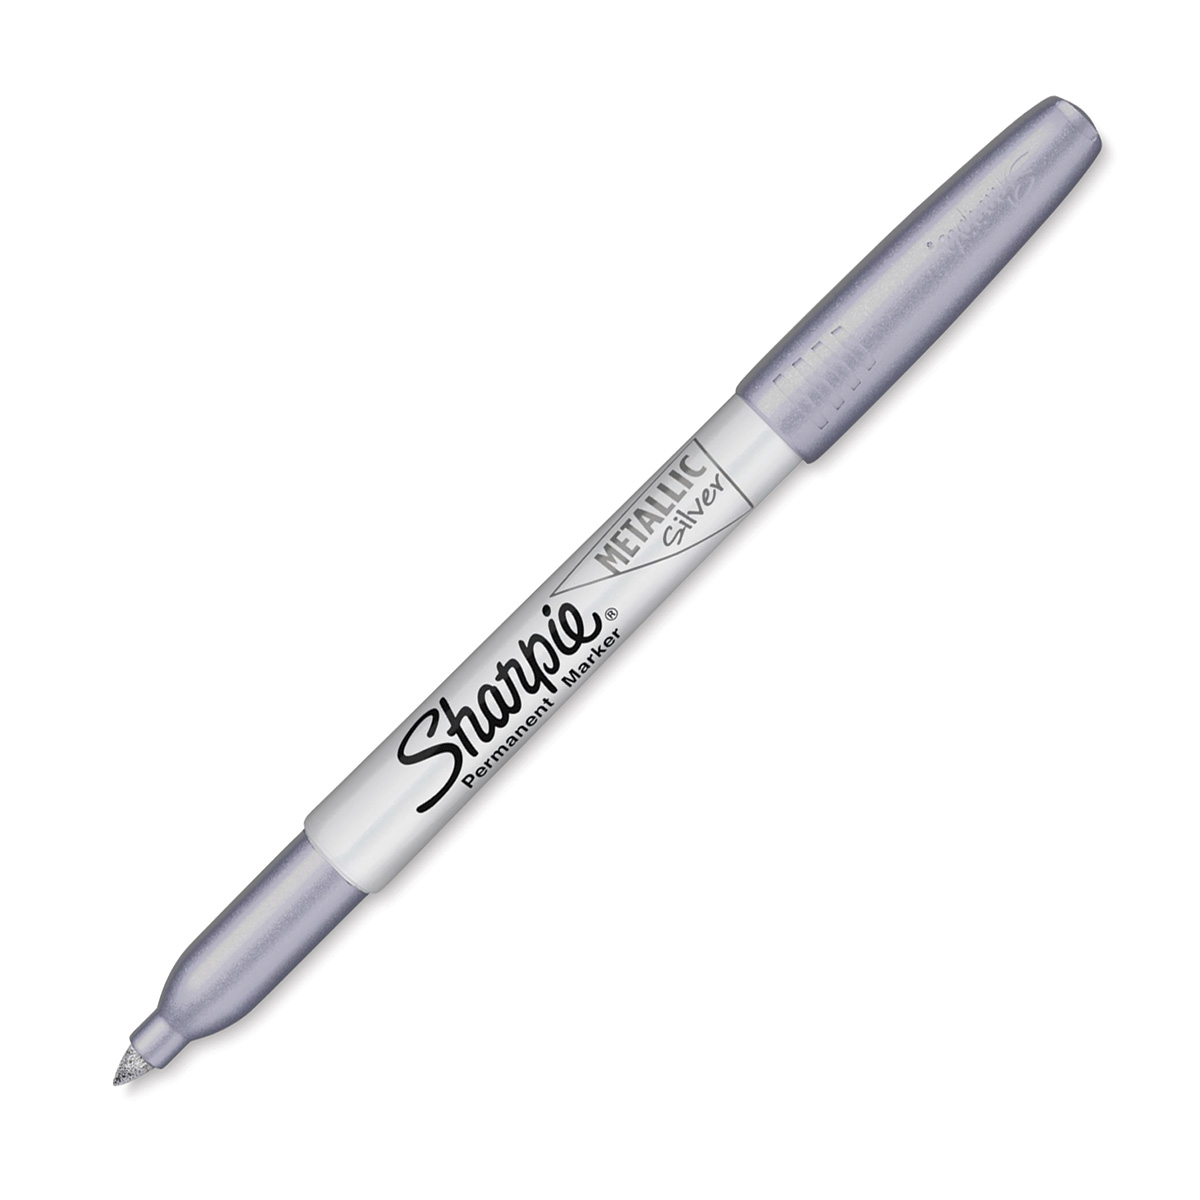 Sharpie Metallic Fine Point Permanent Markers, Bullet Tip, Silver, 36/Pack  (2003899)